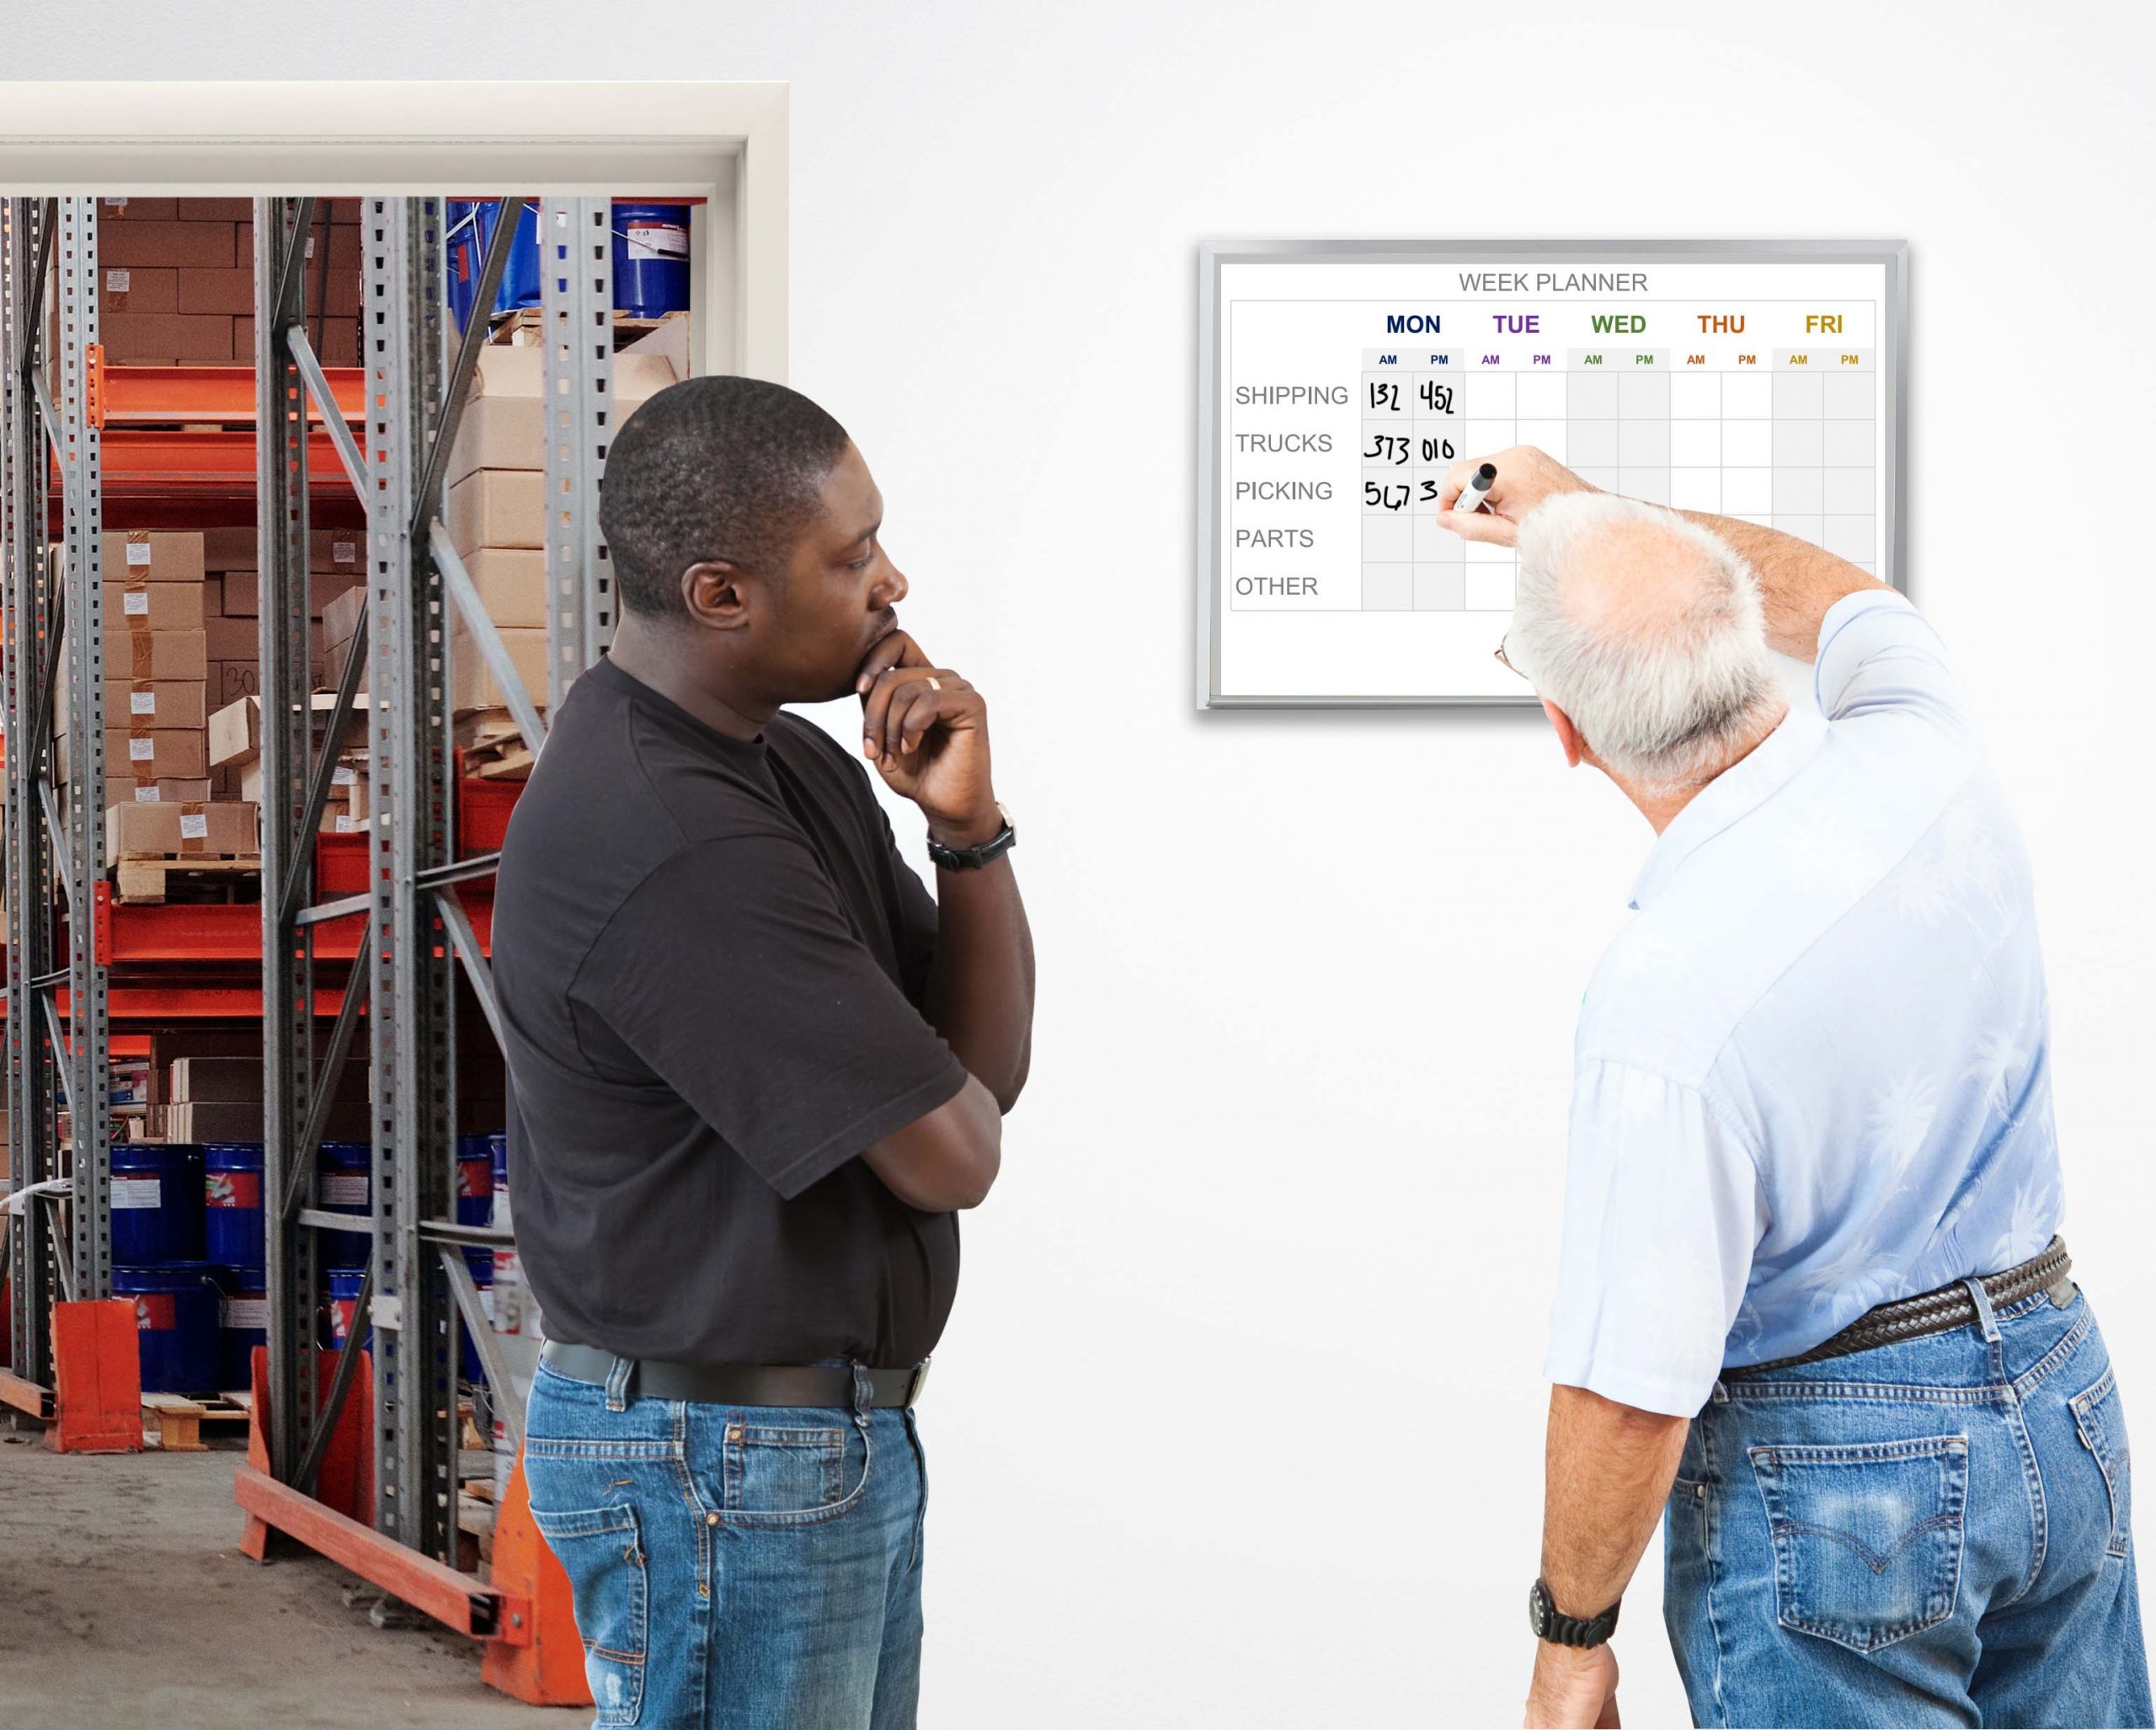 How to Manage your Fleet with Custom Dry Erase